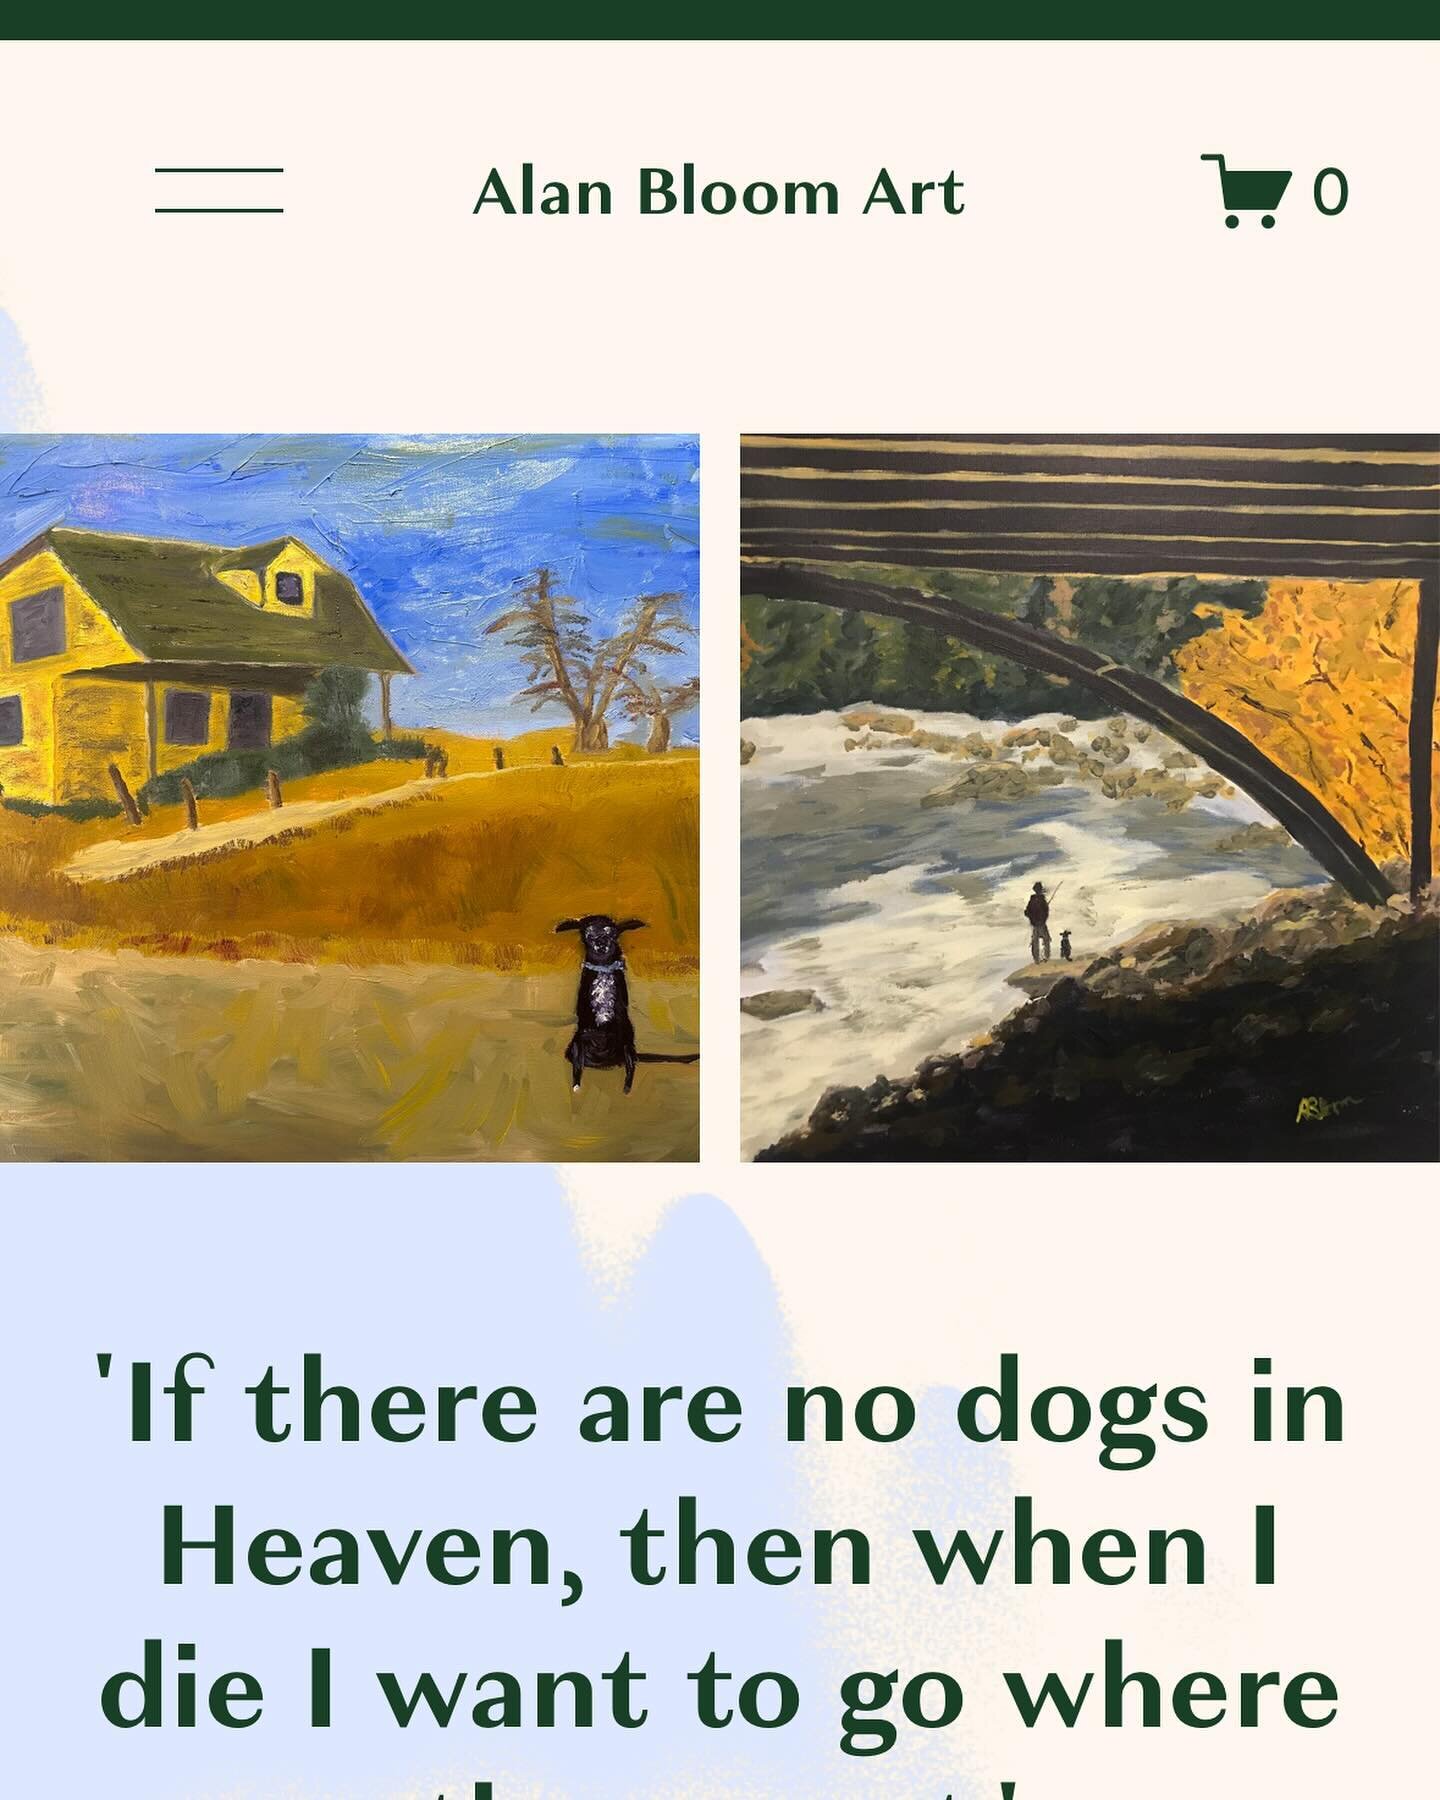 The new, improved, full blown version of www.alanbloomart.com is now live.